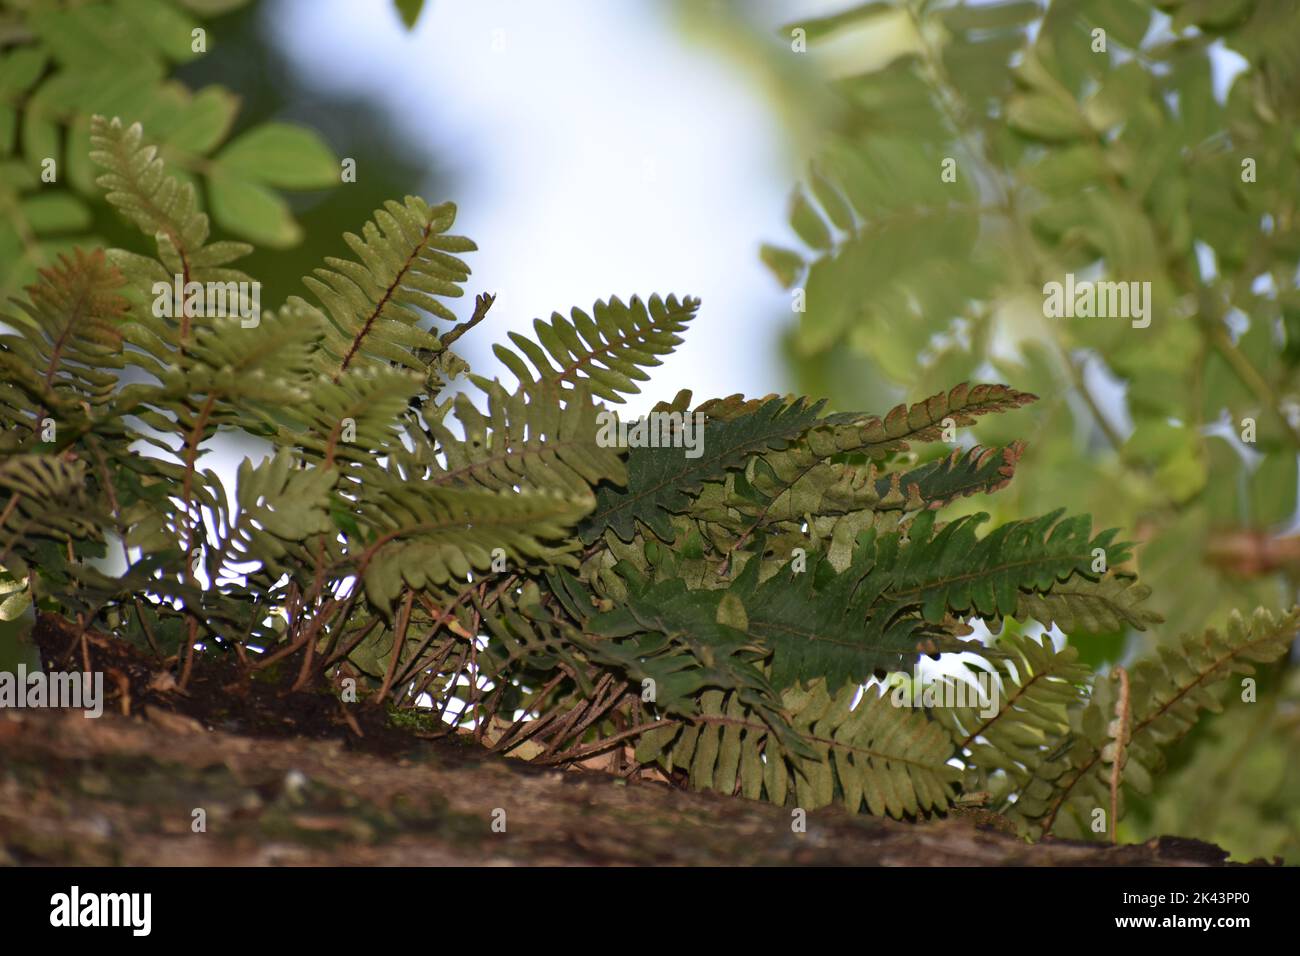 Polypodium sp. ferns on a tree in St. Augustine, Trinidad Stock Photo